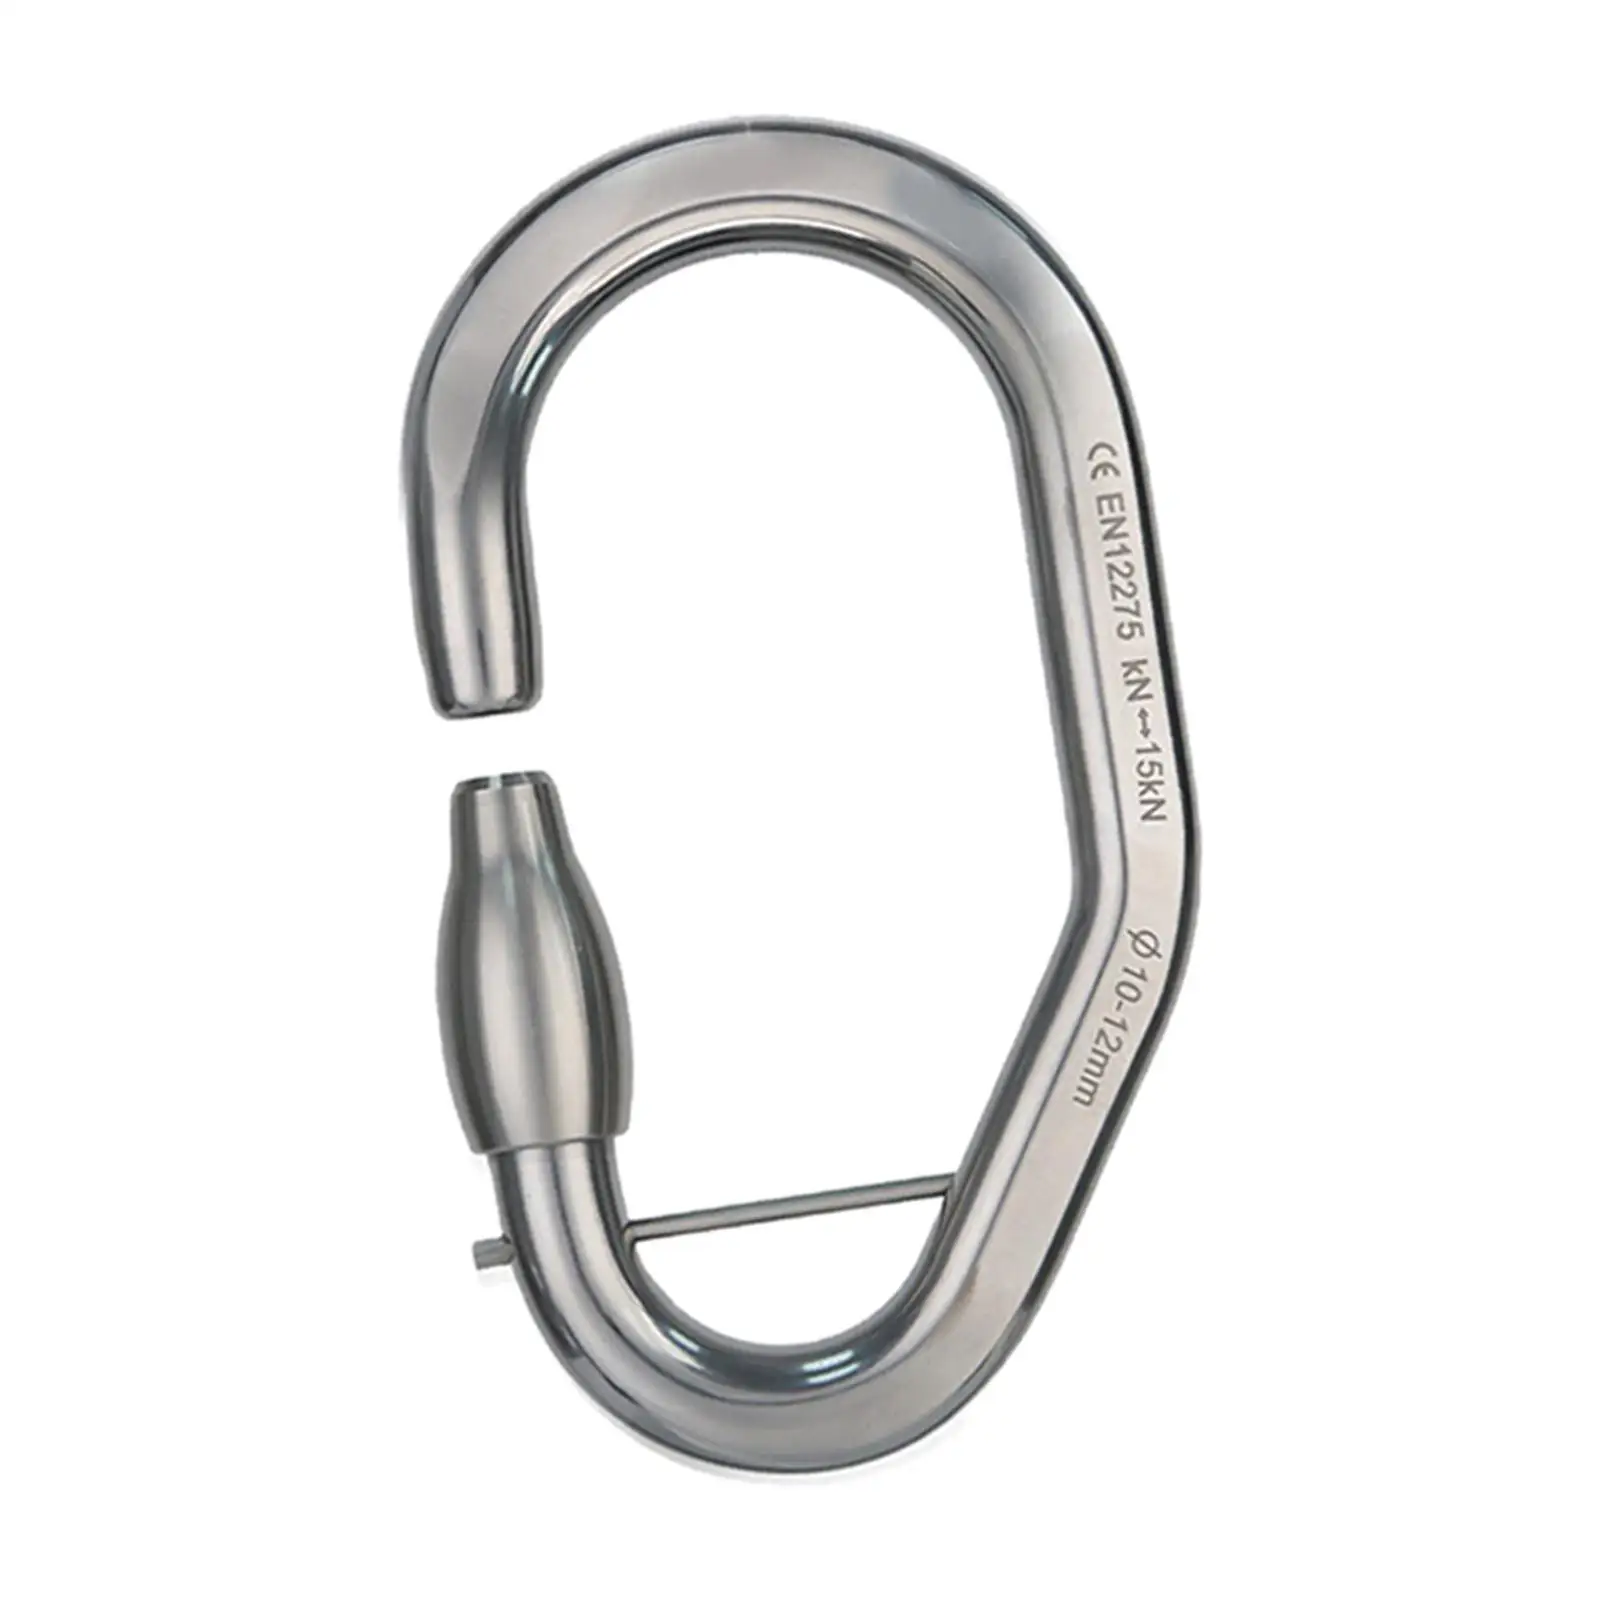 Lightweight Climbing Carabiner Locking 15kN Durable Heavy Duty Clip Hooks for Outdoor Hiking Camping Rescuing Tree Arborist